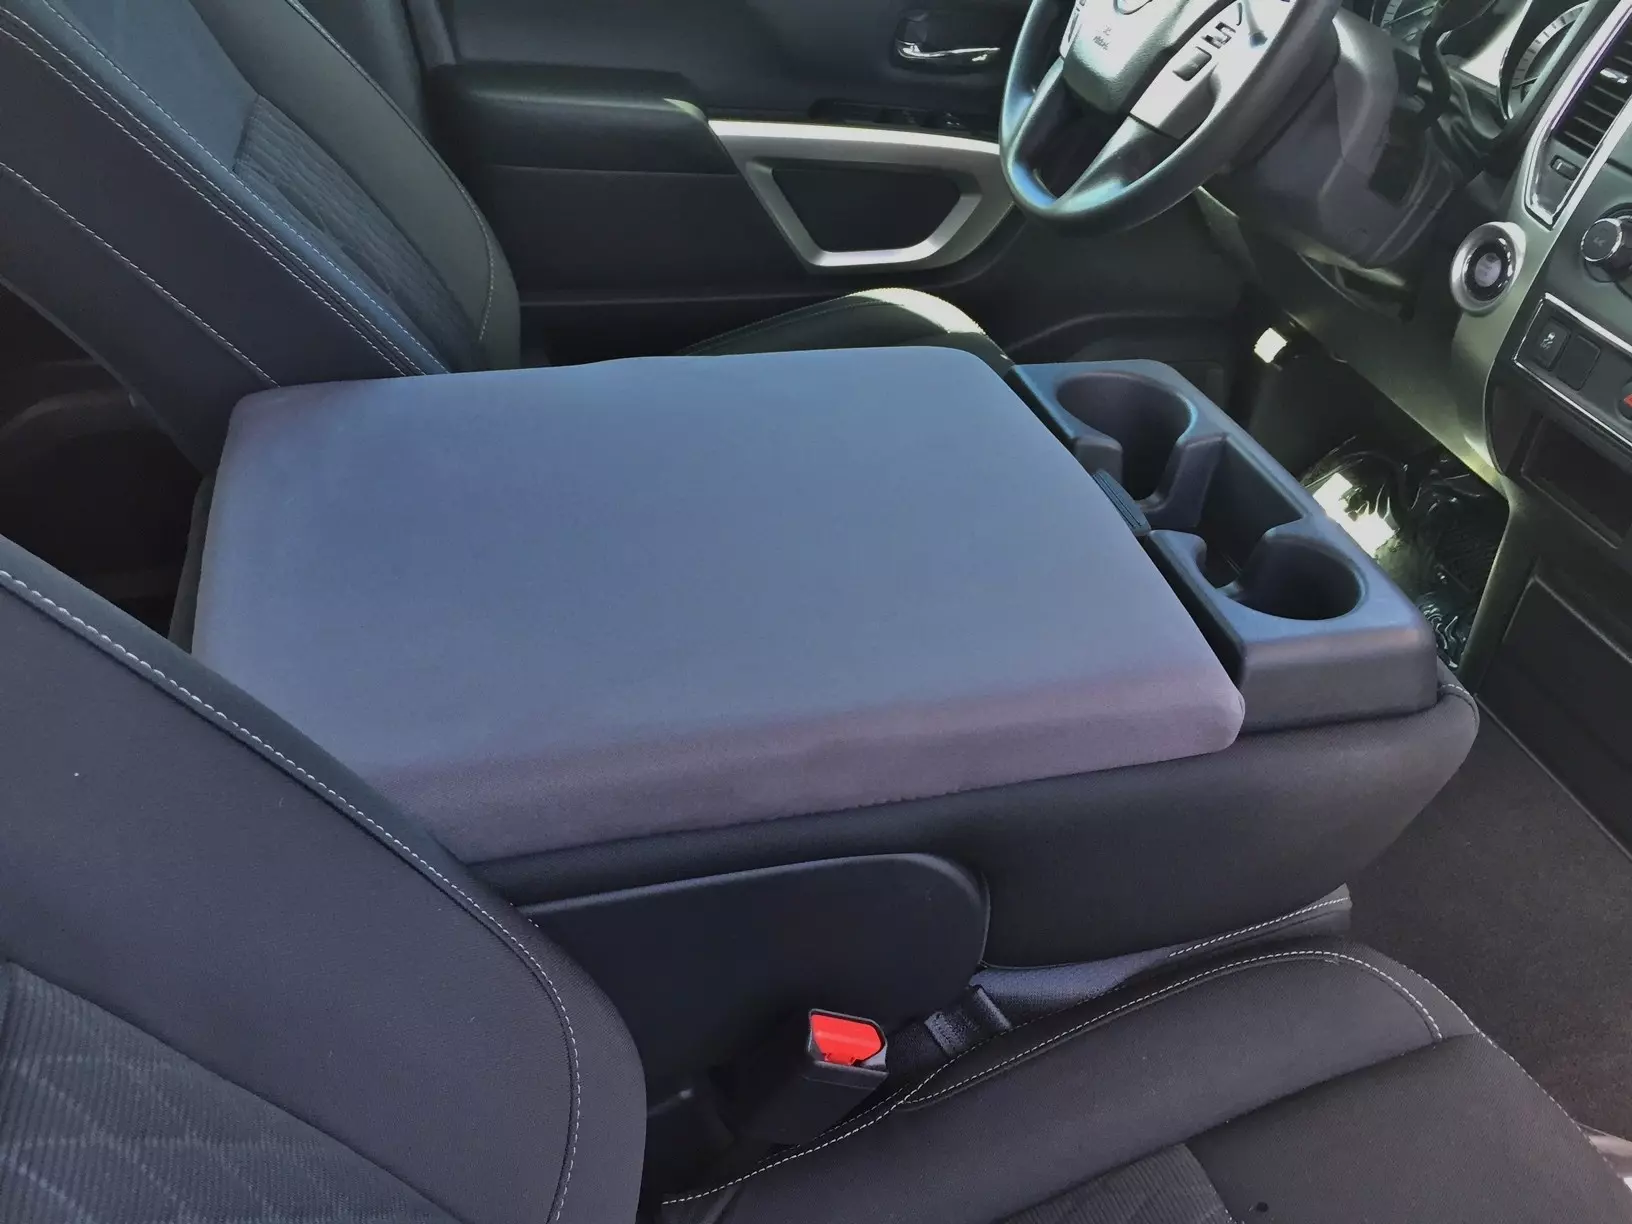 Buy Neoprene Center Console Armrest Cover Fits the Nissan Titan 2004-2013 (With Front Middle Seat)